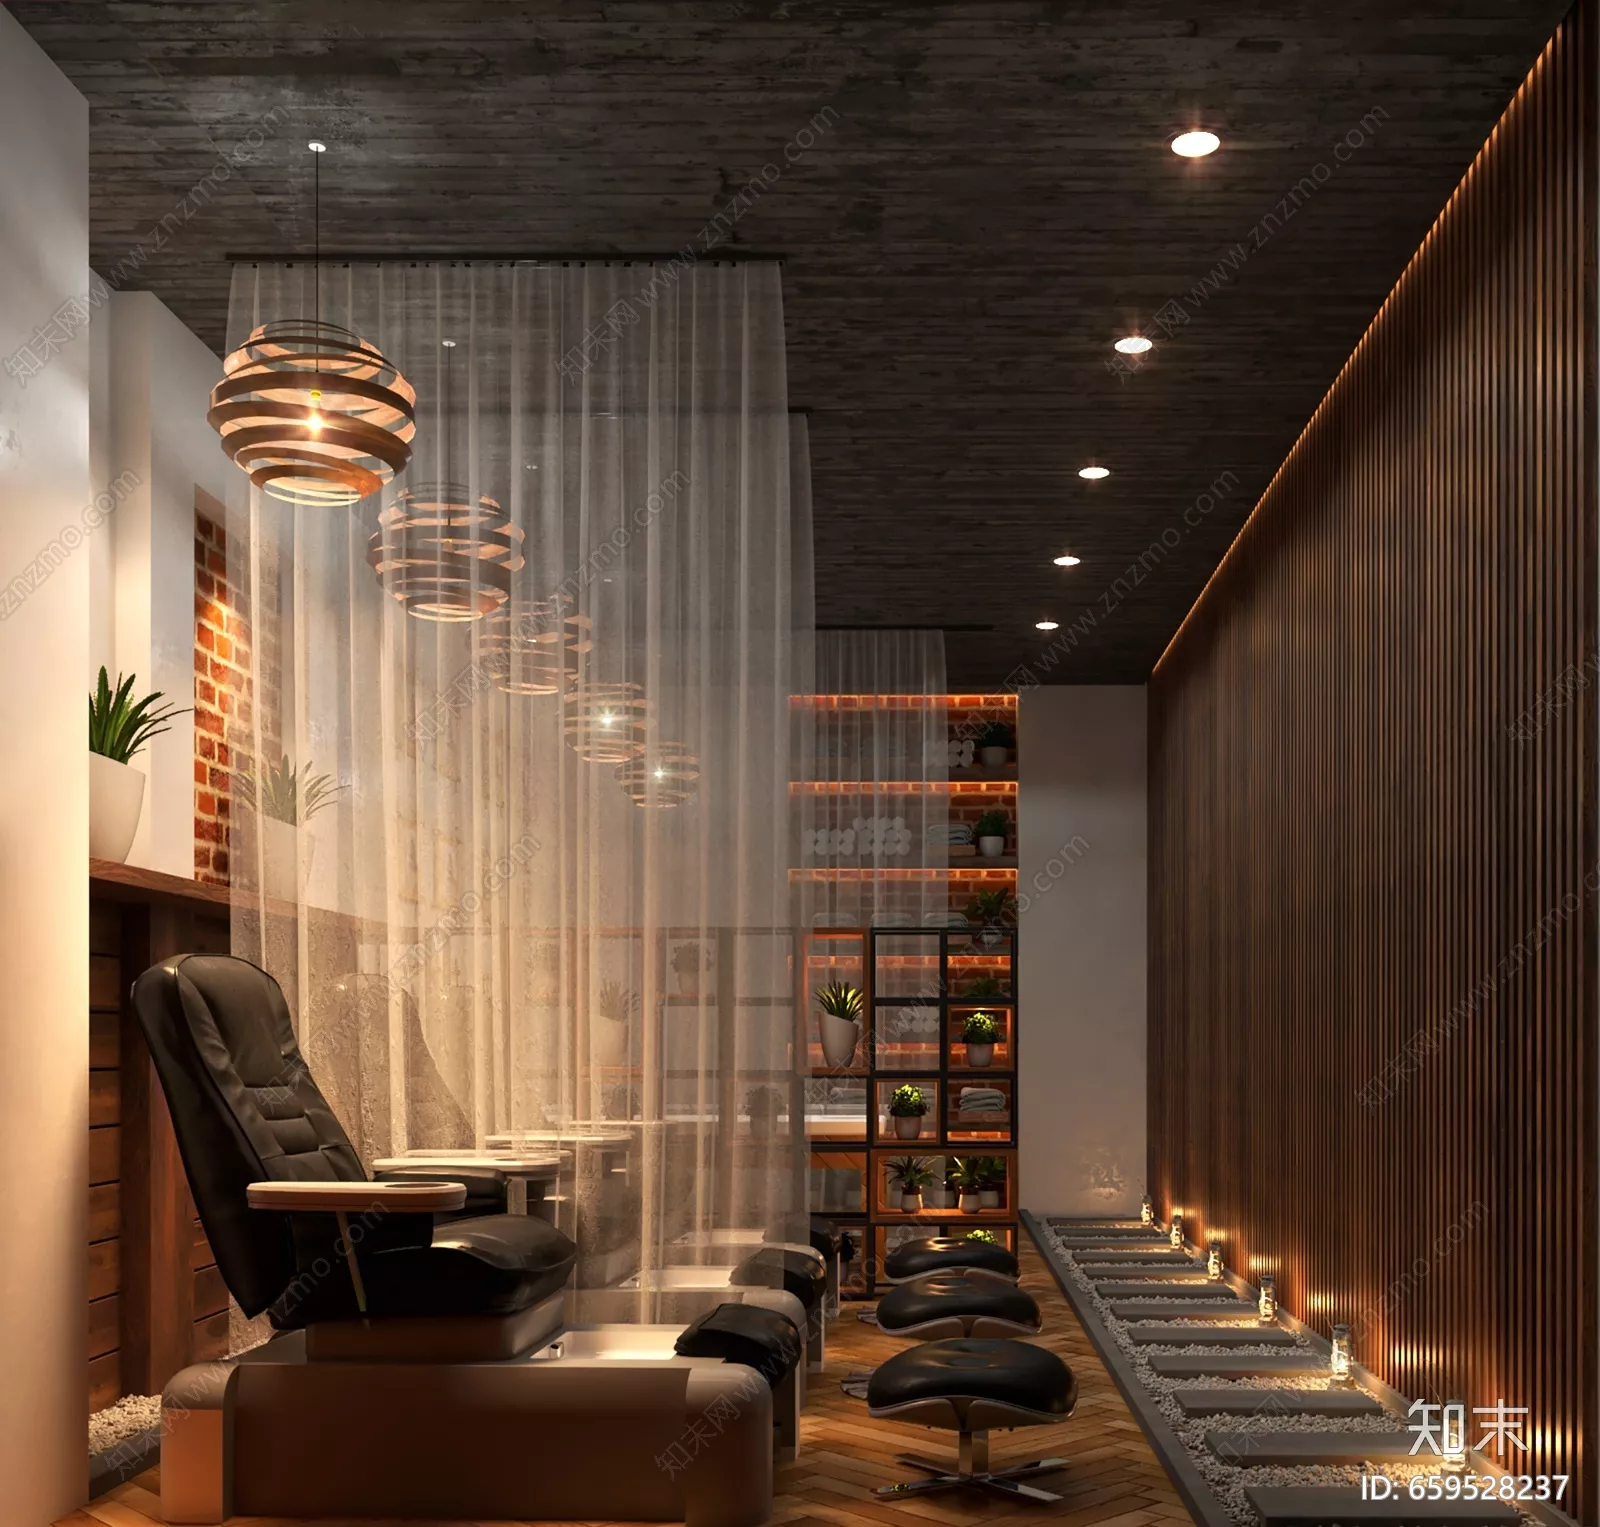 MODERN SPA AND BEAUTY - SKETCHUP 3D SCENE - VRAY OR ENSCAPE - ID13885